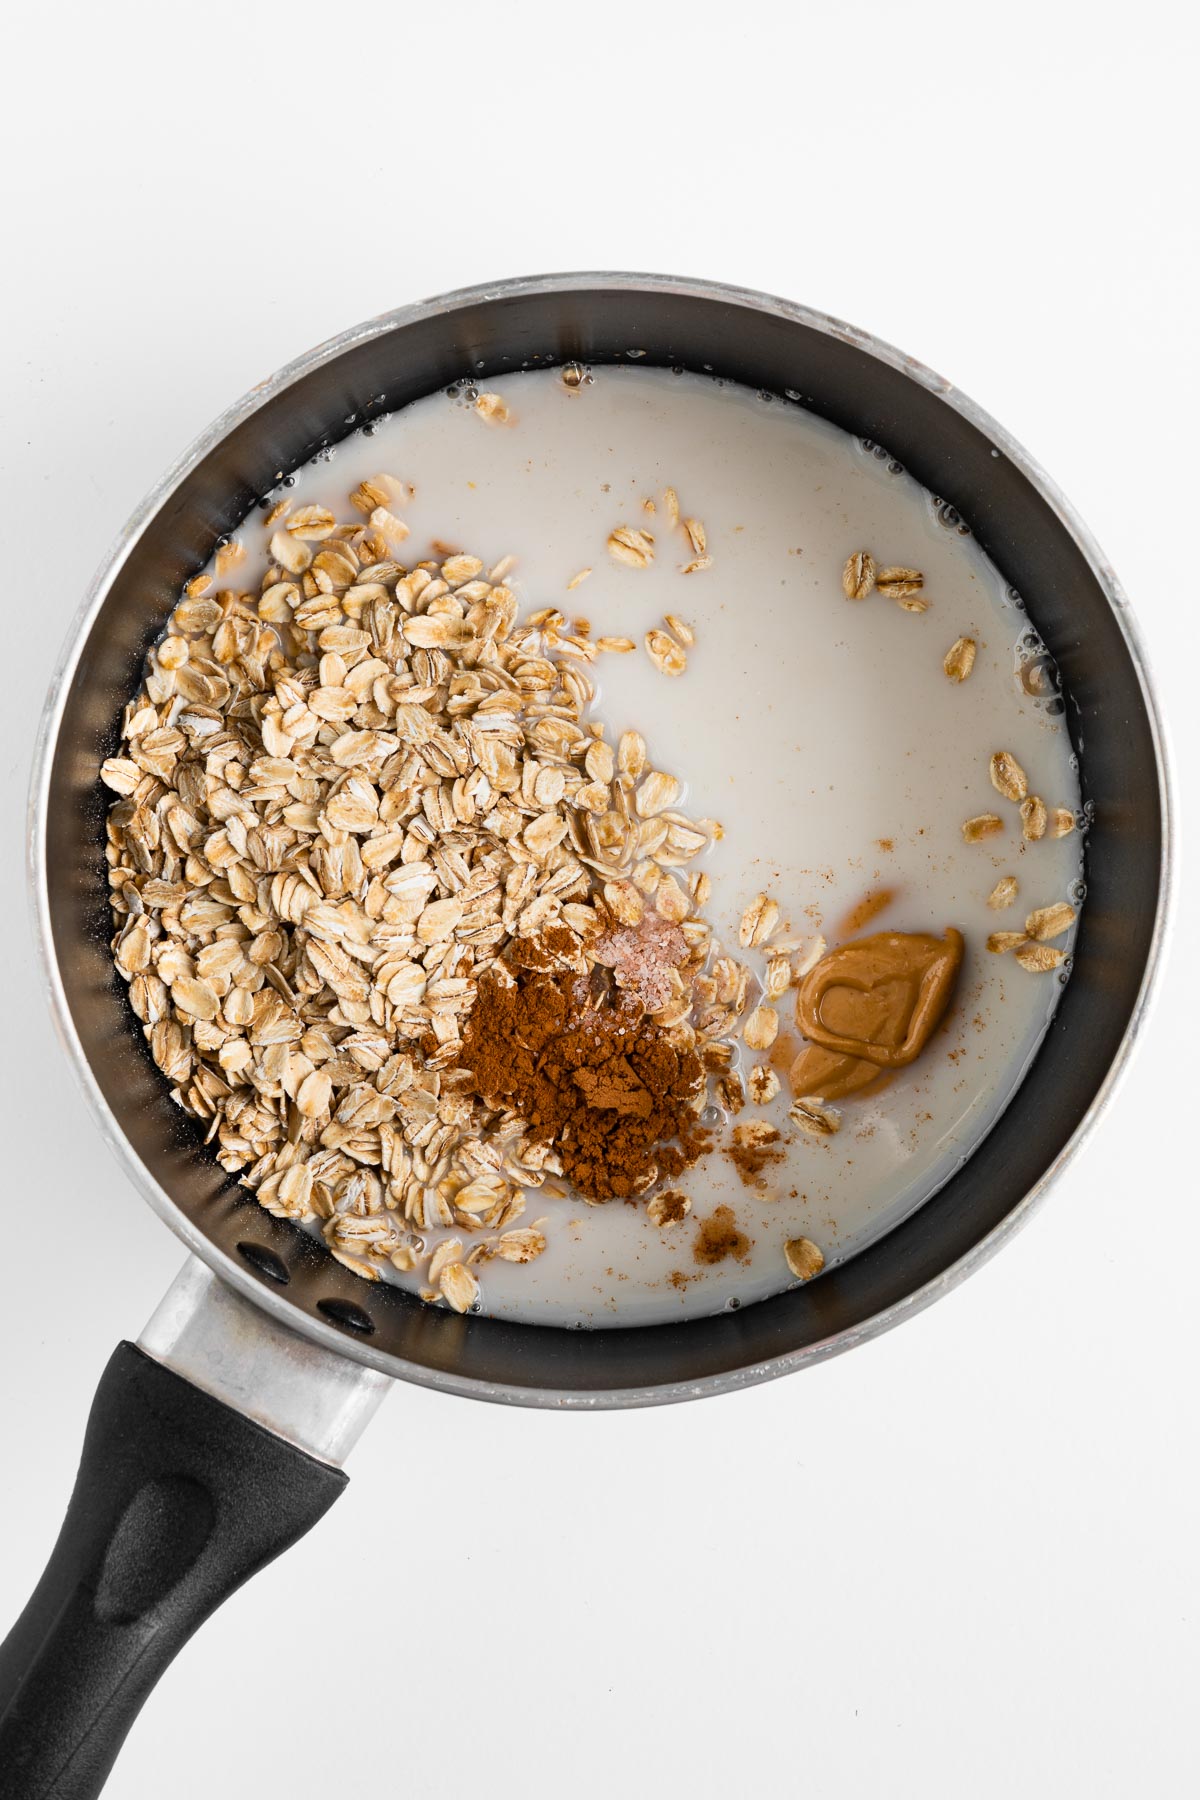 rolled oats, almond milk, cinnamon, and nut butter inside a small saucepan